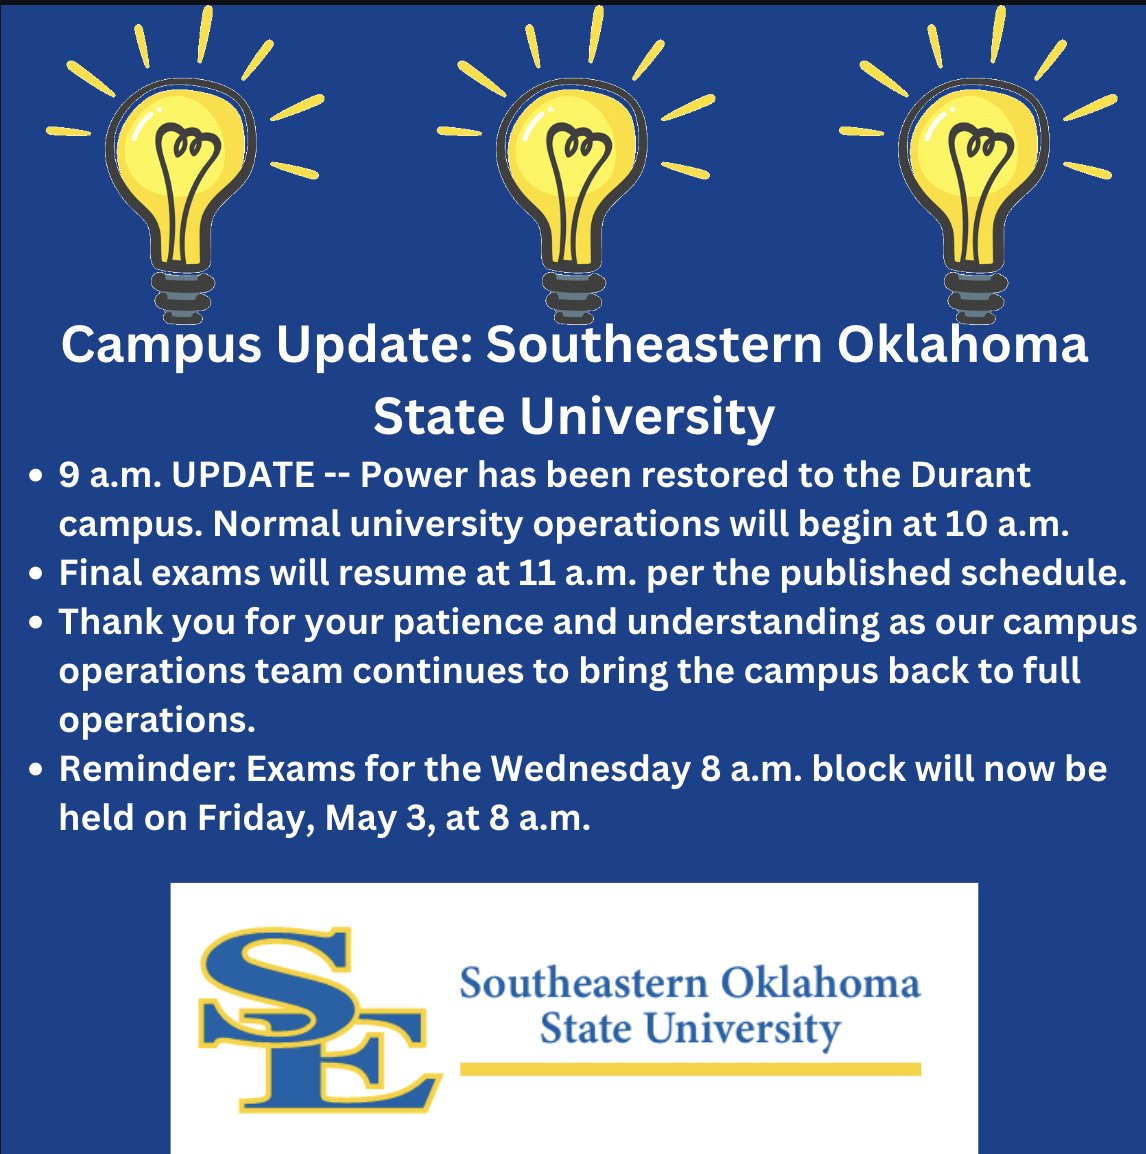 9 a.m. UPDATE -- Power has been restored. Normal university operations will begin at 10 a.m. Final exams will resume at 11 a.m. Reminder: Exams for the Wednesday 8 a.m. block will now be held on Friday, May 3, at 8 a.m.